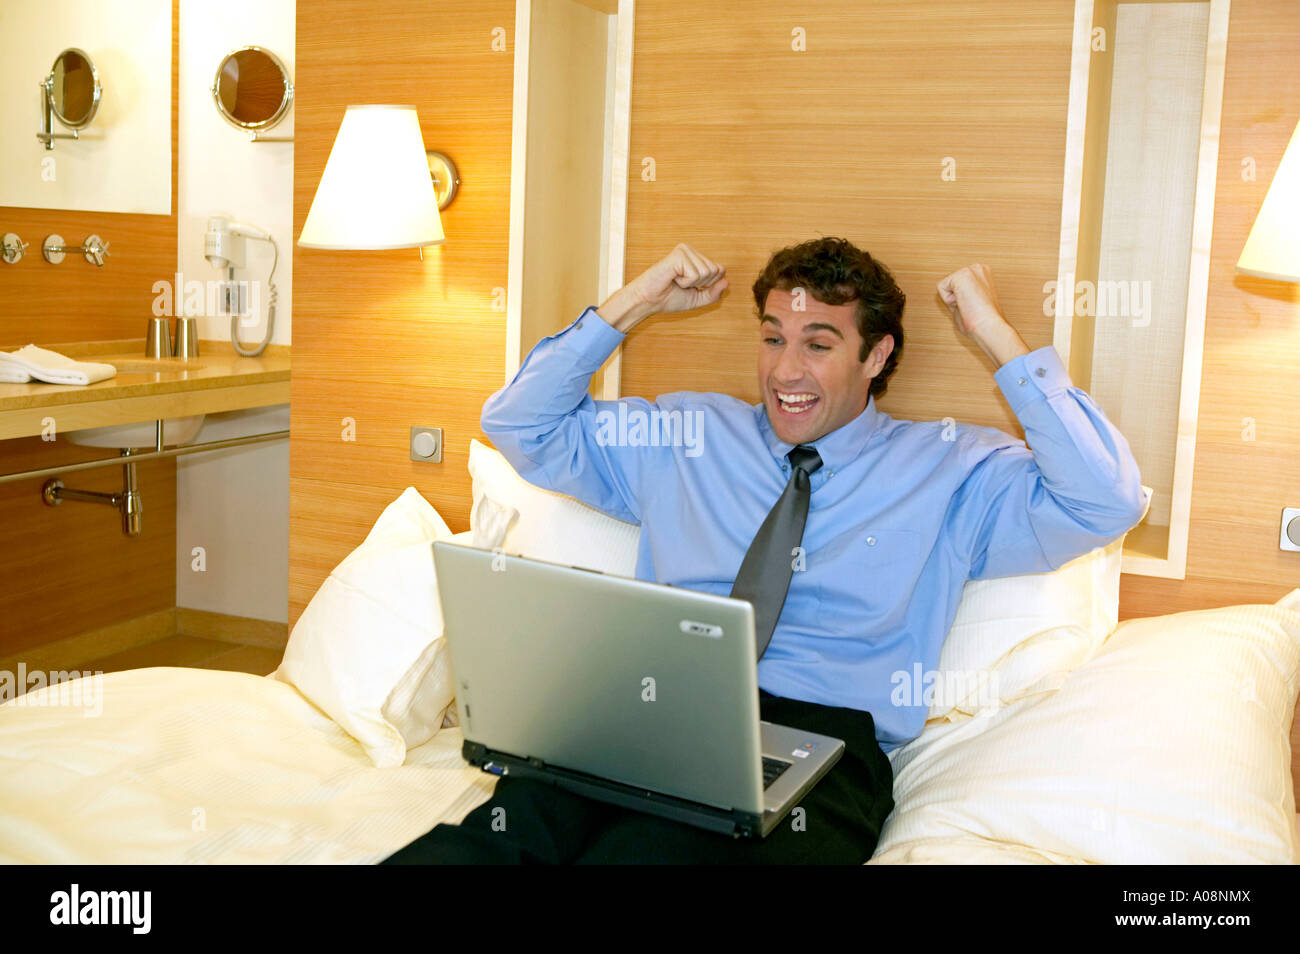 Manager arbeitet mit dem Laptop in seinem Hotelzimmer, Happy Manager working on a laptop in his hotel room Stock Photo